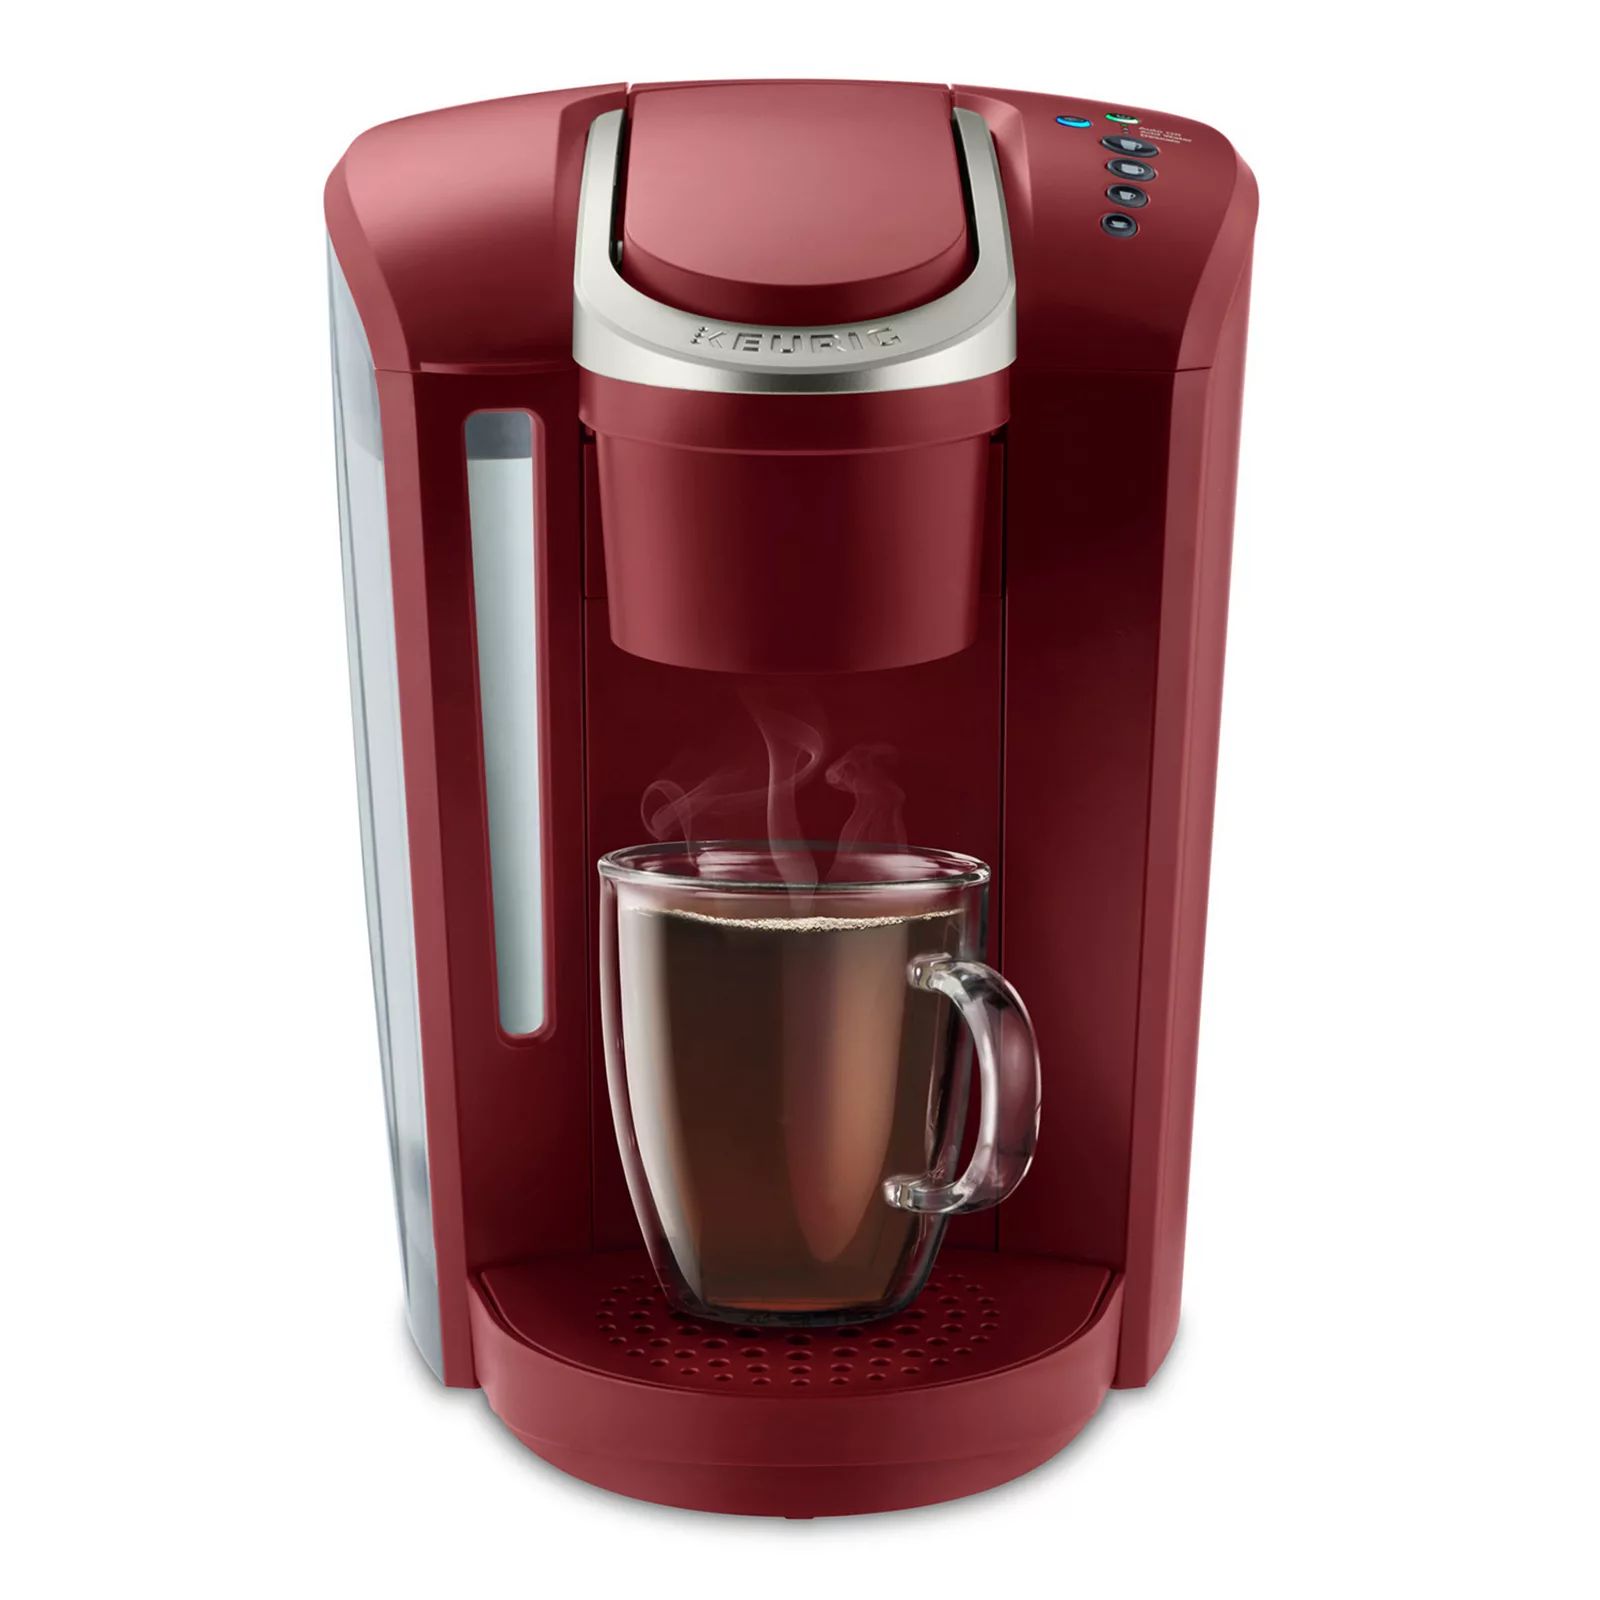 Keurig K-Select Single-Serve K-Cup Pod Coffee Maker with Strength Control, Red | Kohl's